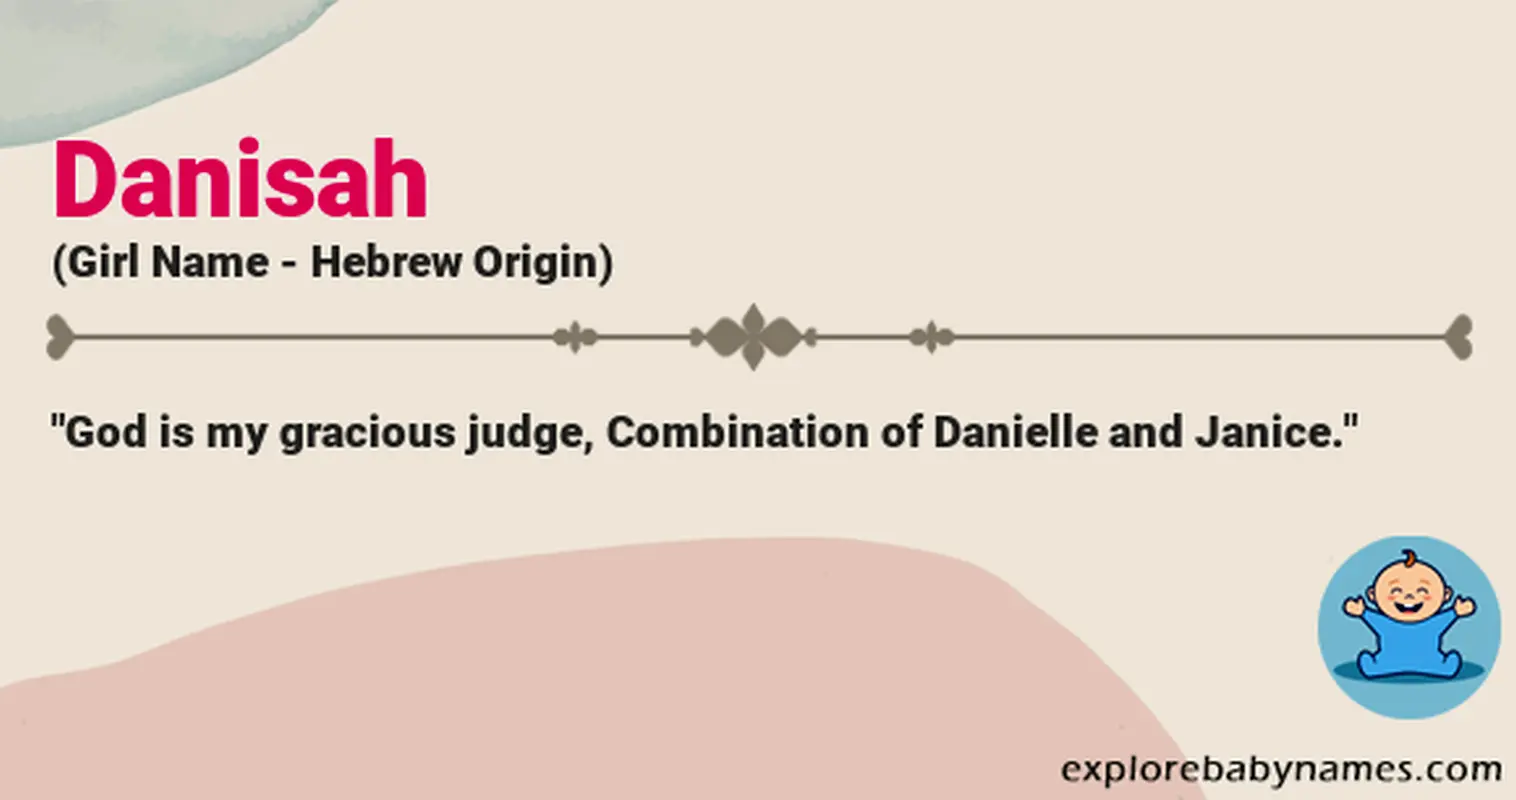 Meaning of Danisah